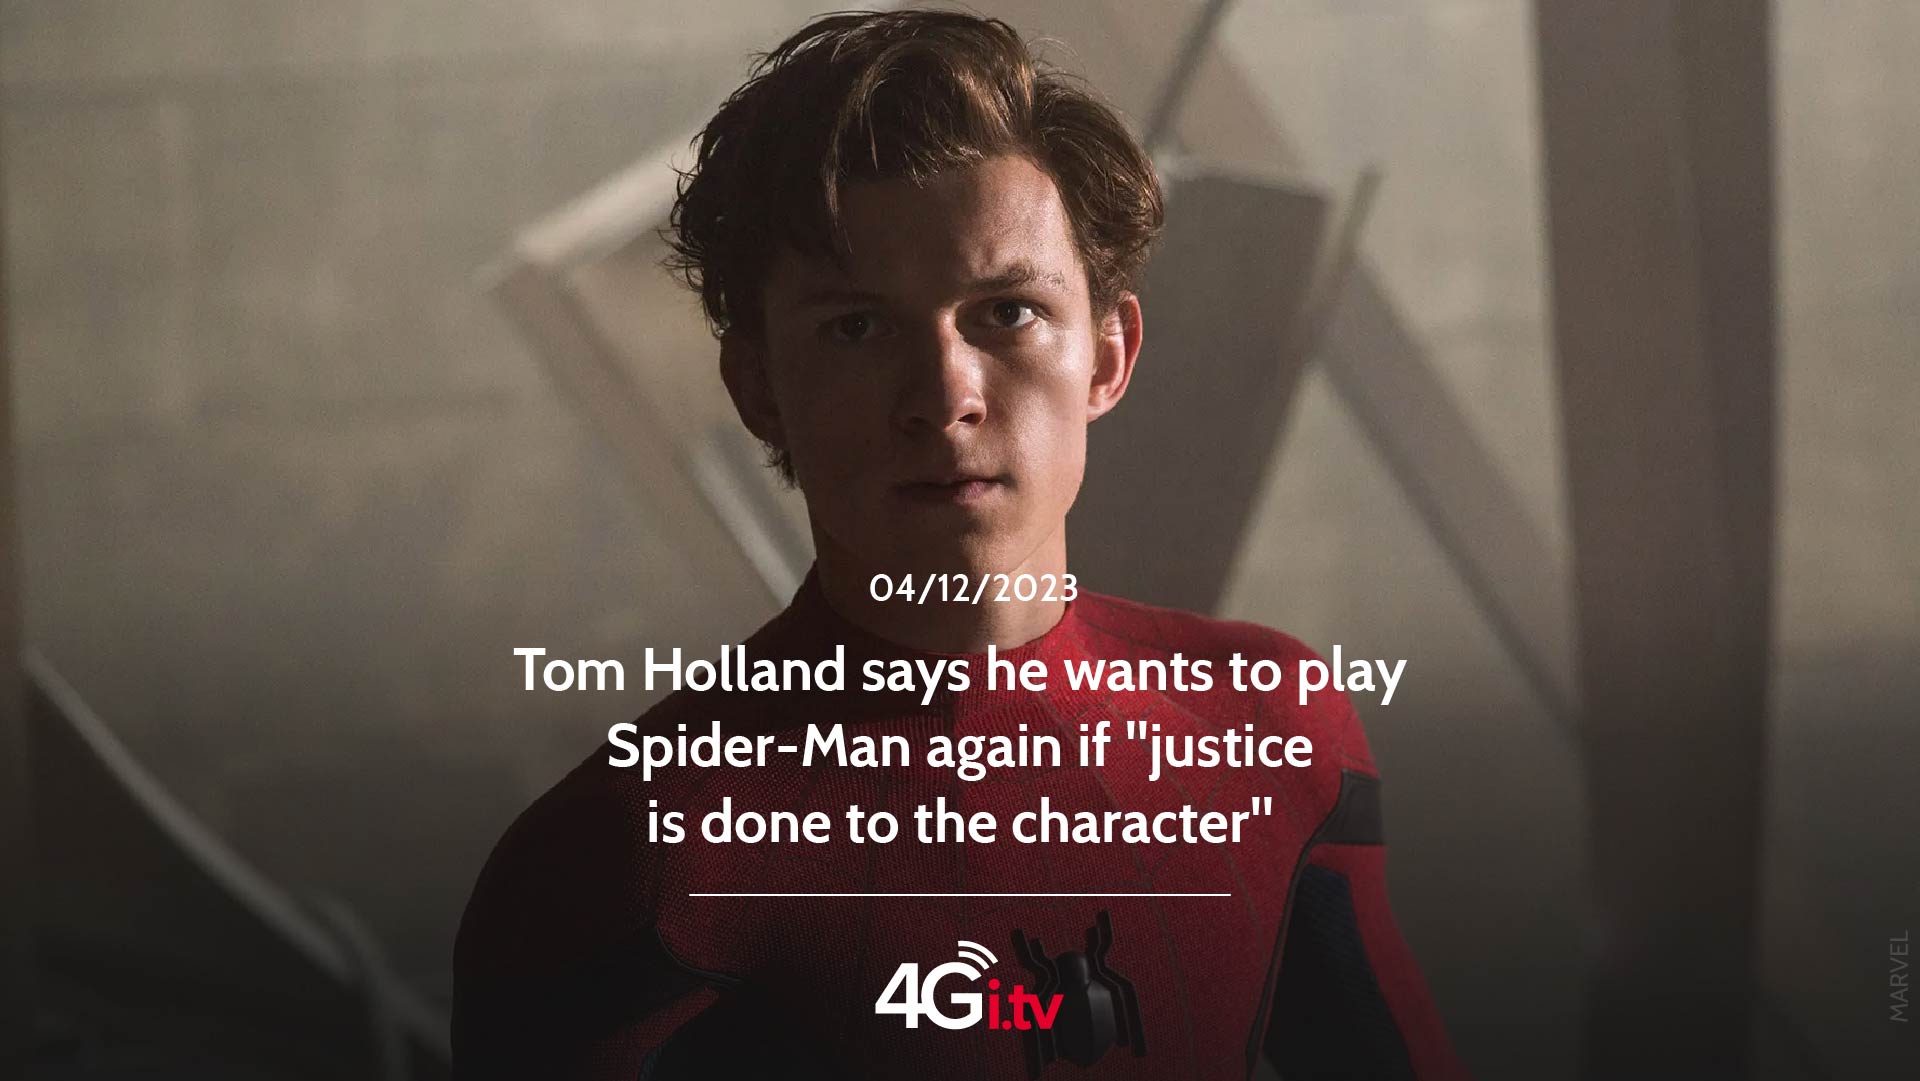 Lee más sobre el artículo Tom Holland says he wants to play Spider-Man again if “justice is done to the character”